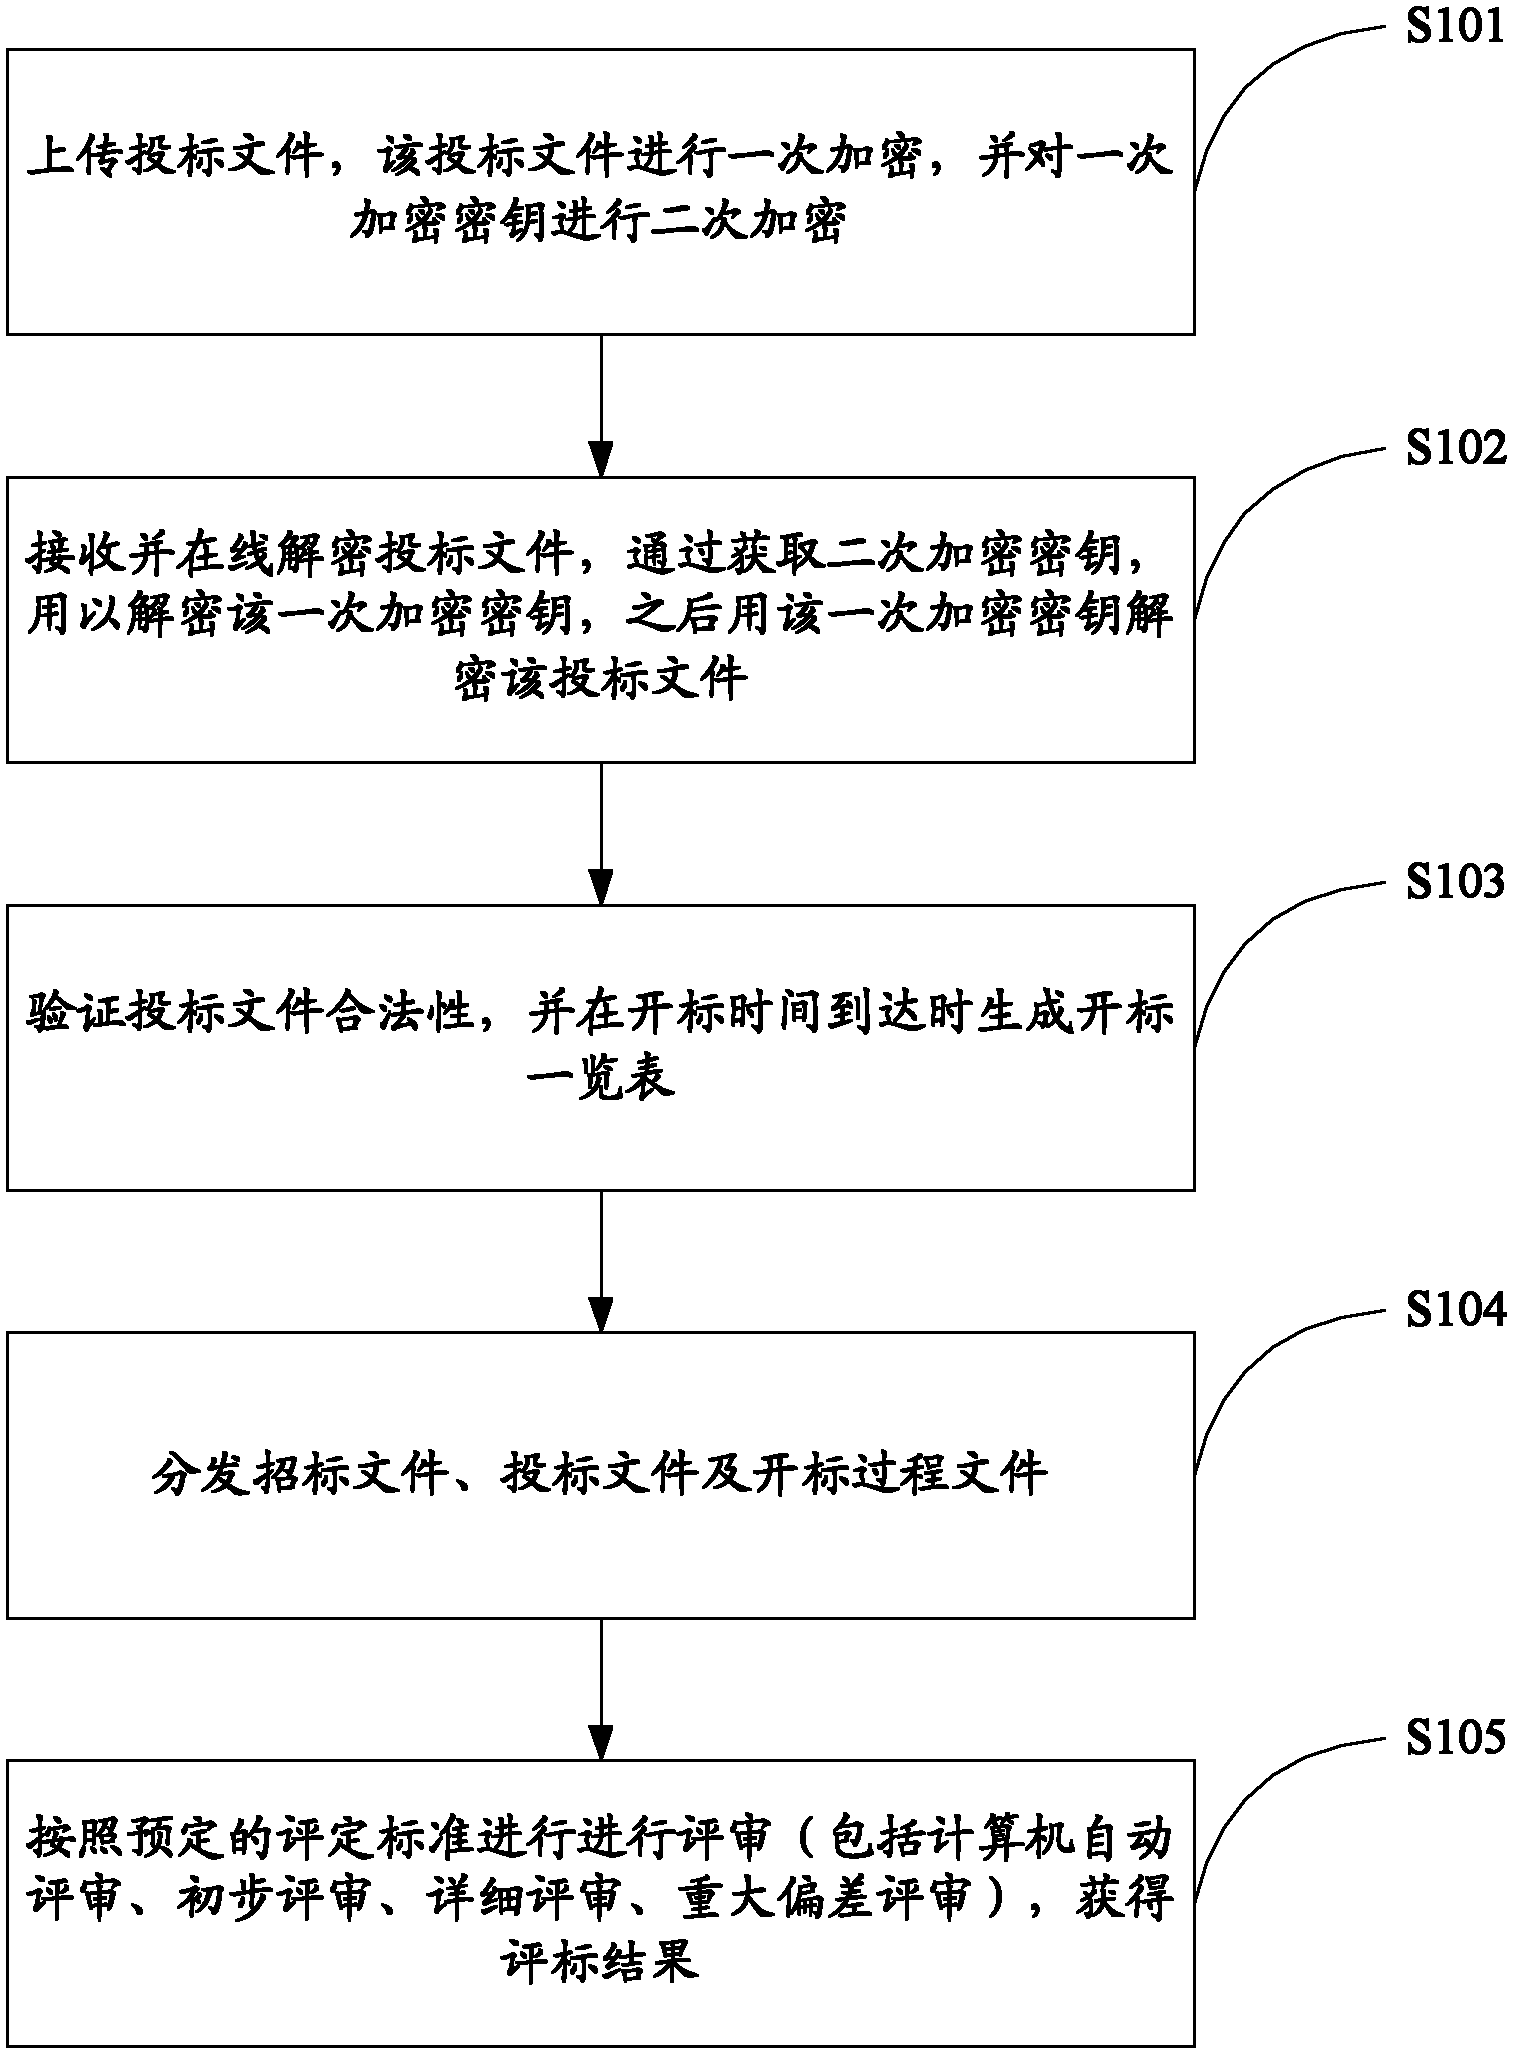 Method and system for remote bid opening and bid evaluation